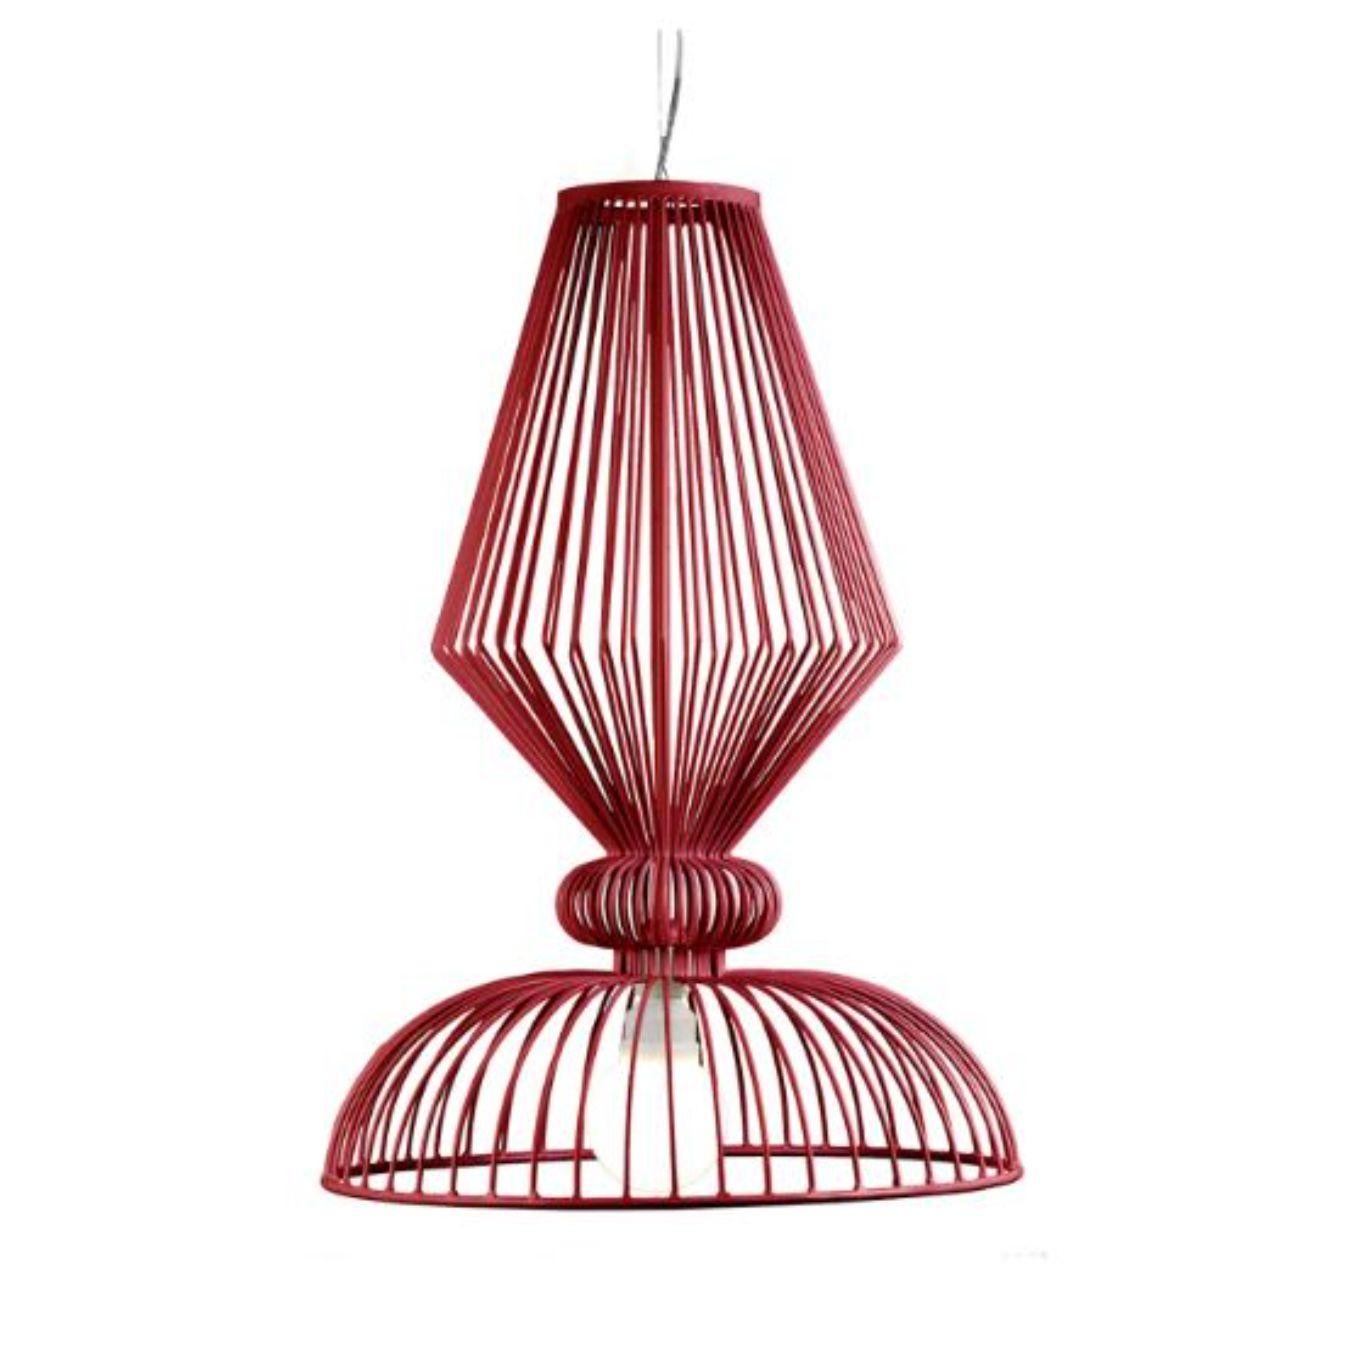 Portuguese Mint Expand Suspension Lamp by Dooq For Sale